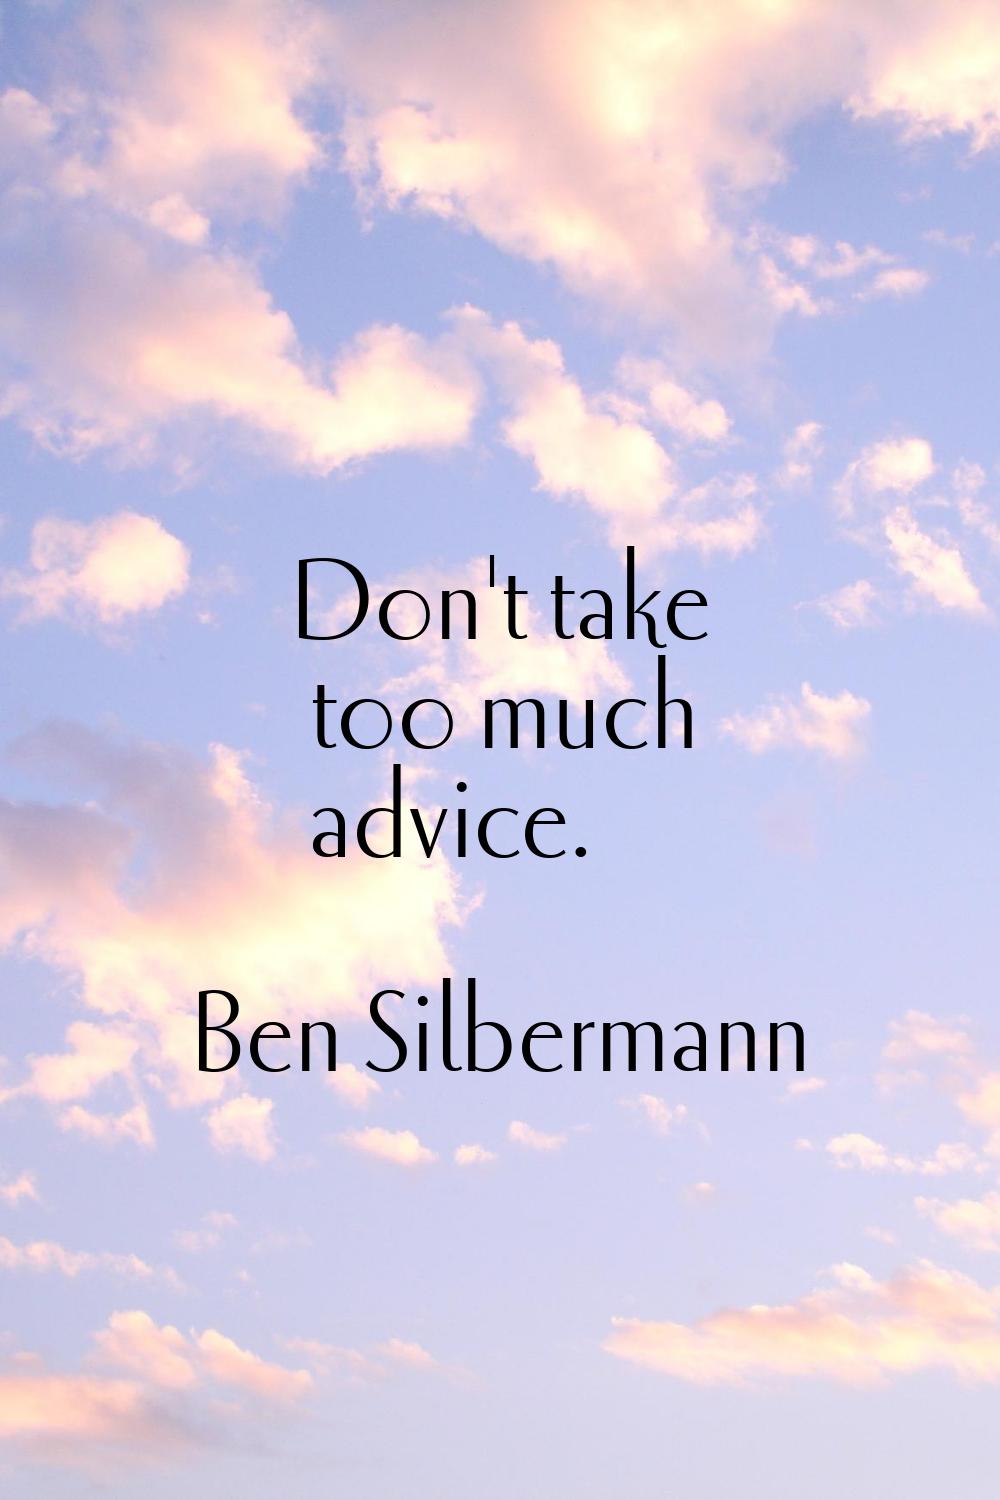 Don't take too much advice.